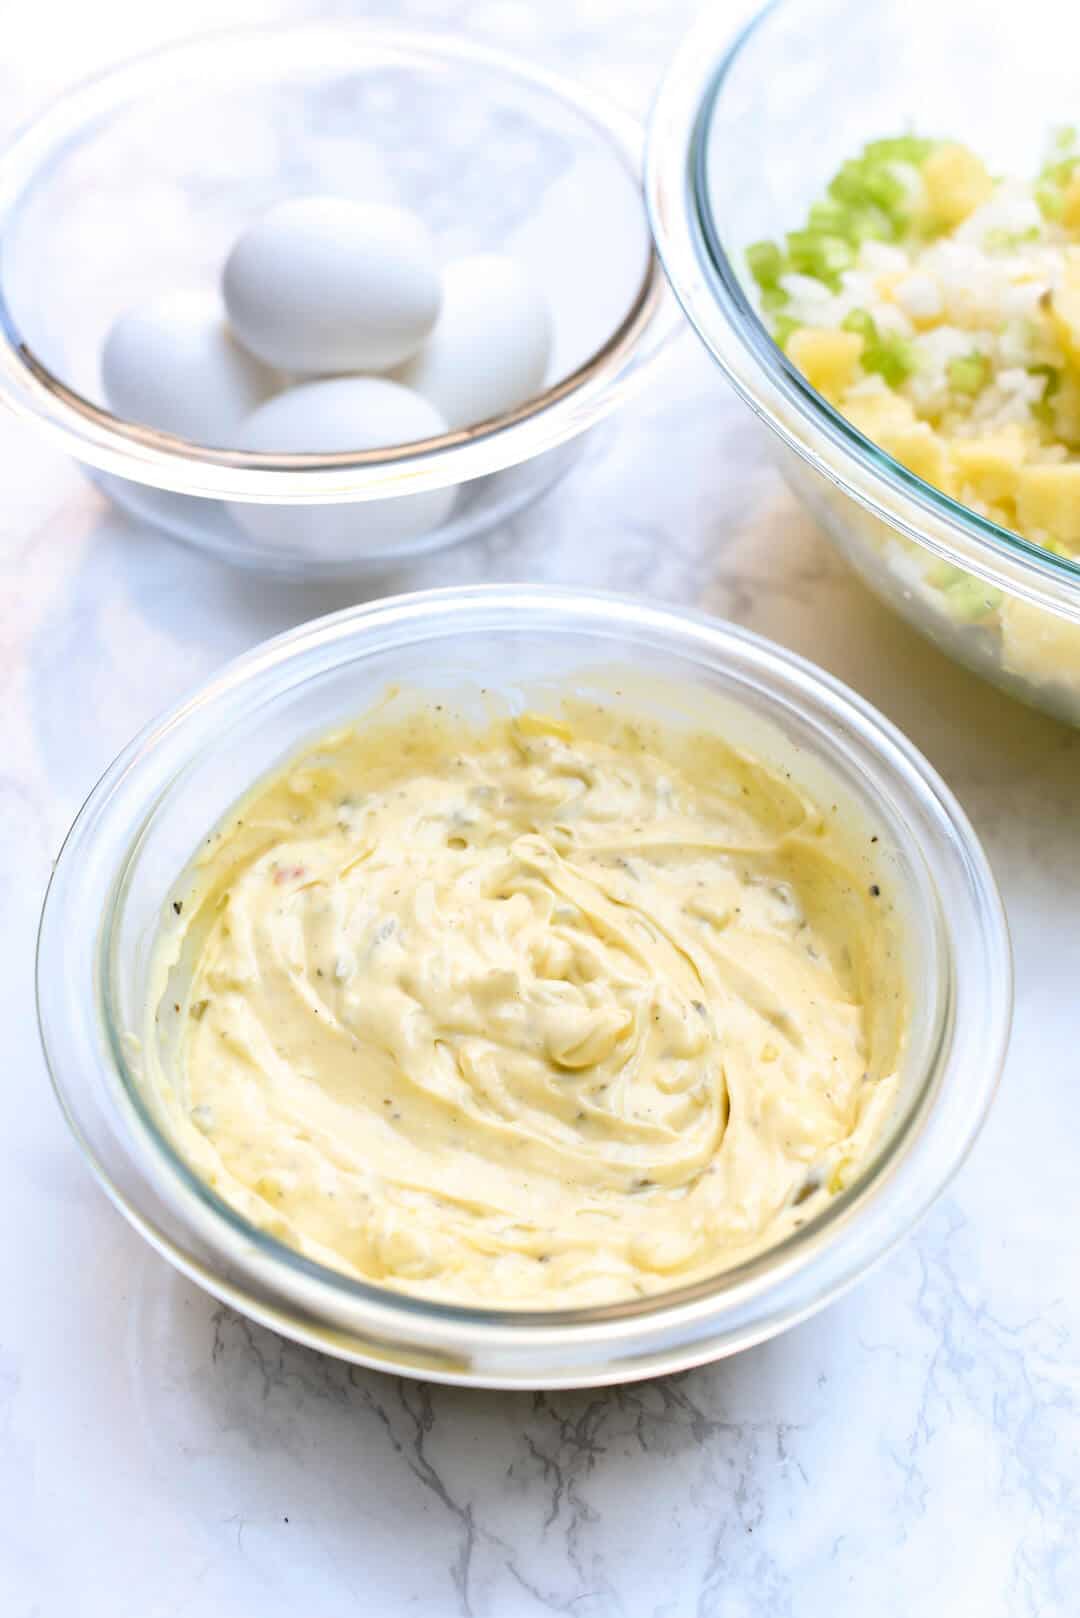 A close up image of the creamy dressing in a small glass bowl.